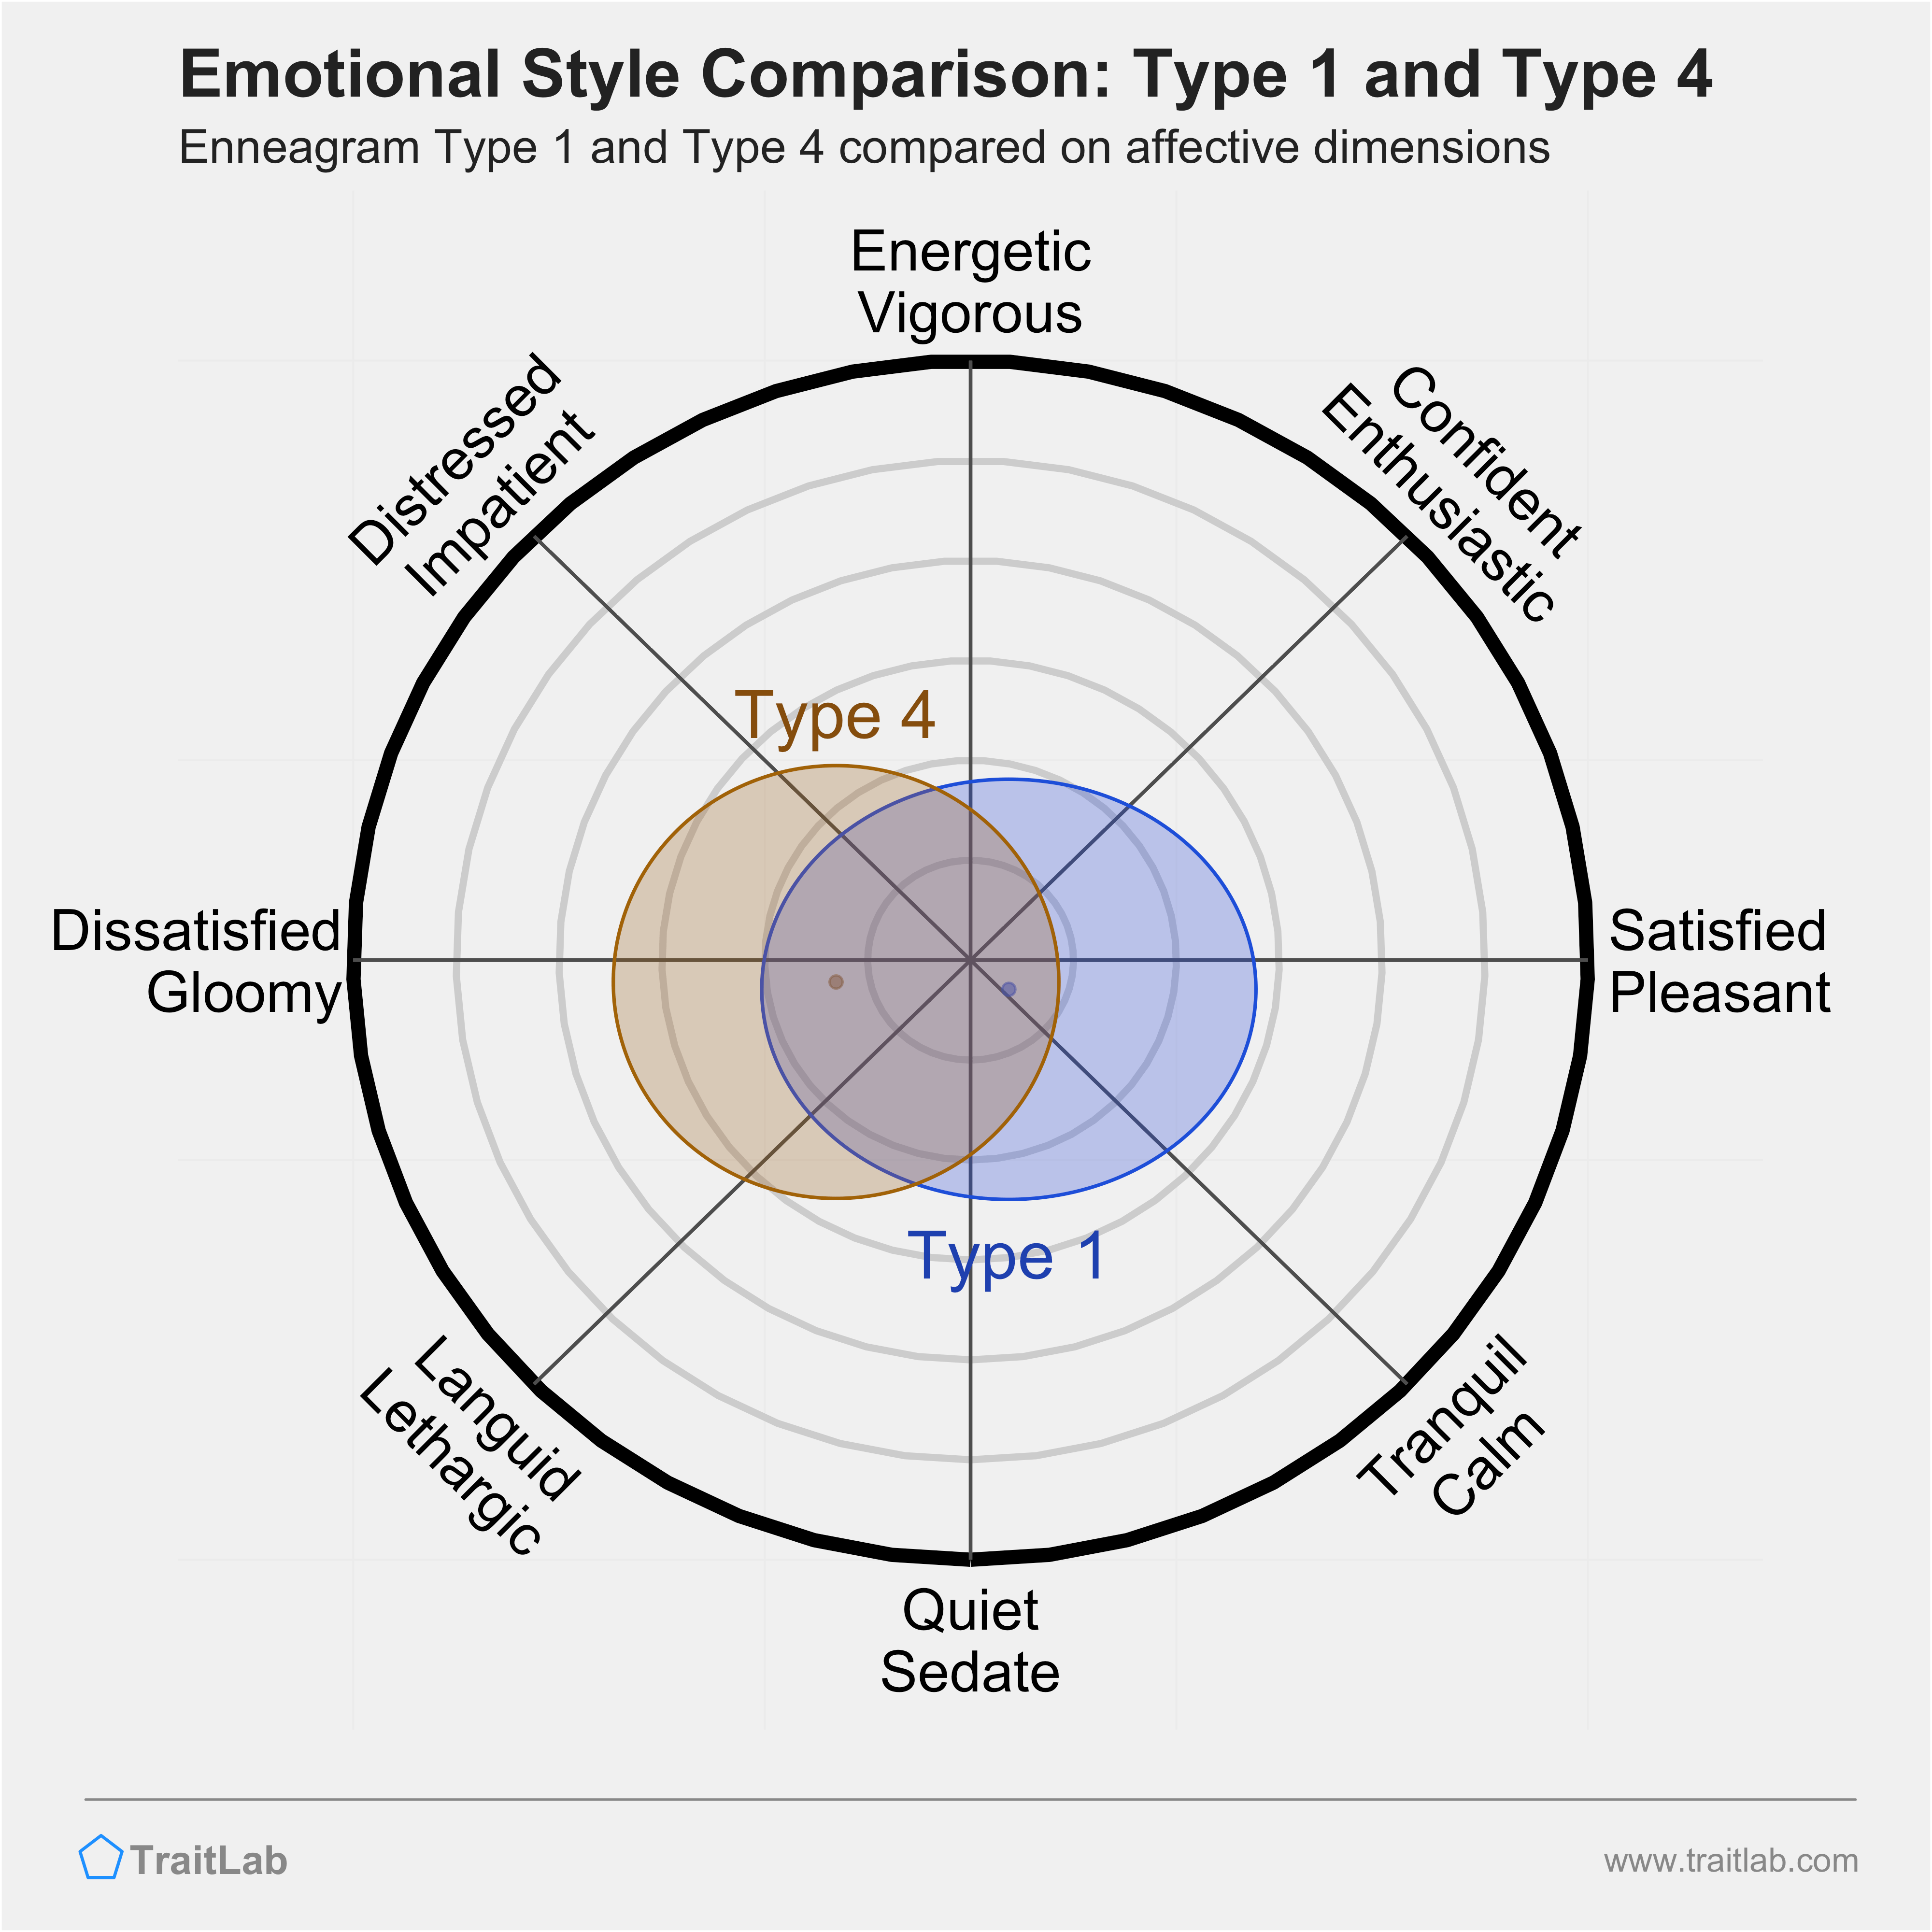 Type 1 and Type 4 comparison across emotional (affective) dimensions